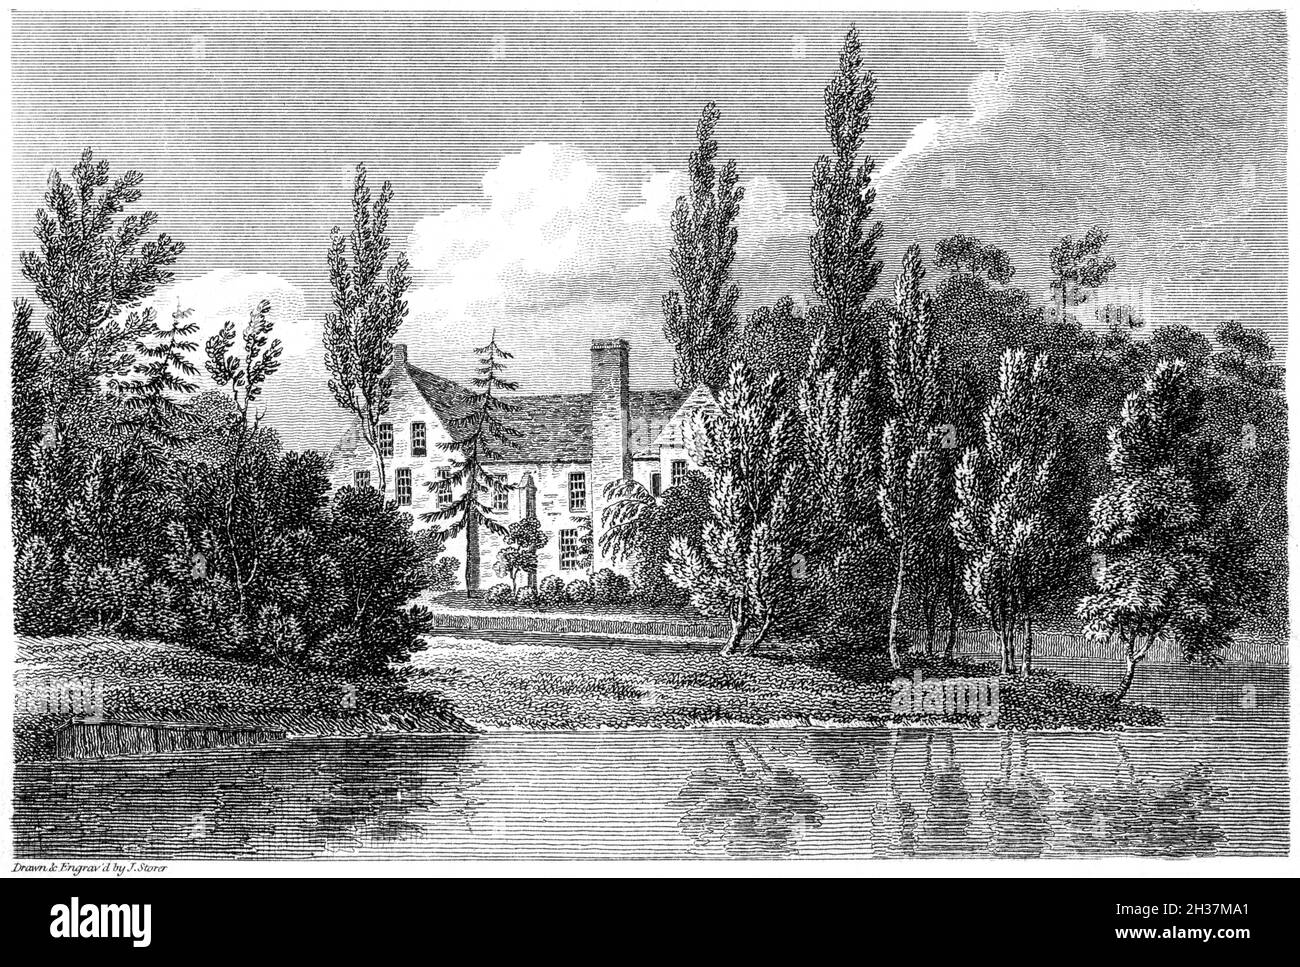 An engraving of The Priory, Ware, Hertfordshire UK scanned at high resolution from a book printed in 1812.  Believed copyright free. Stock Photo